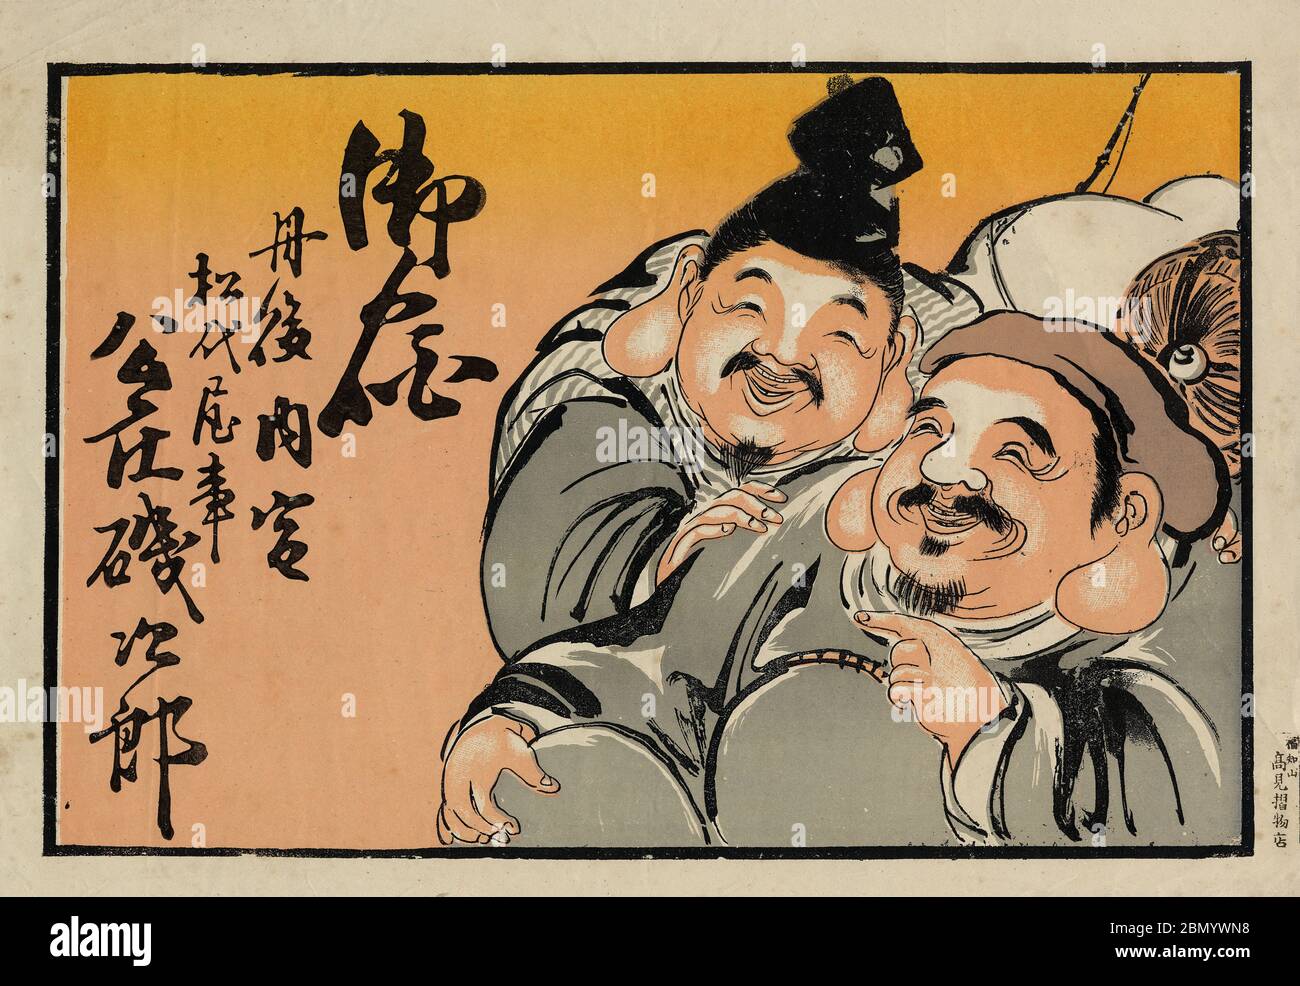 [ 1920s Japan - Japanese Gods of Fortune ] —   Hikifuda (引札), a print used as an advertising flyer by local shops. They were popular from the 1800s through the 1920s.  Daikokuten (大黒天, front) and Ebisu (恵比寿), two of the Seven Gods of Fortune (七福神 Shichi Fukujin), symbolizing prosperous business.  Daikokuten and Ebisu are traditionally seen as gods of business and trade.  20th century vintage advertising flyer. Stock Photo